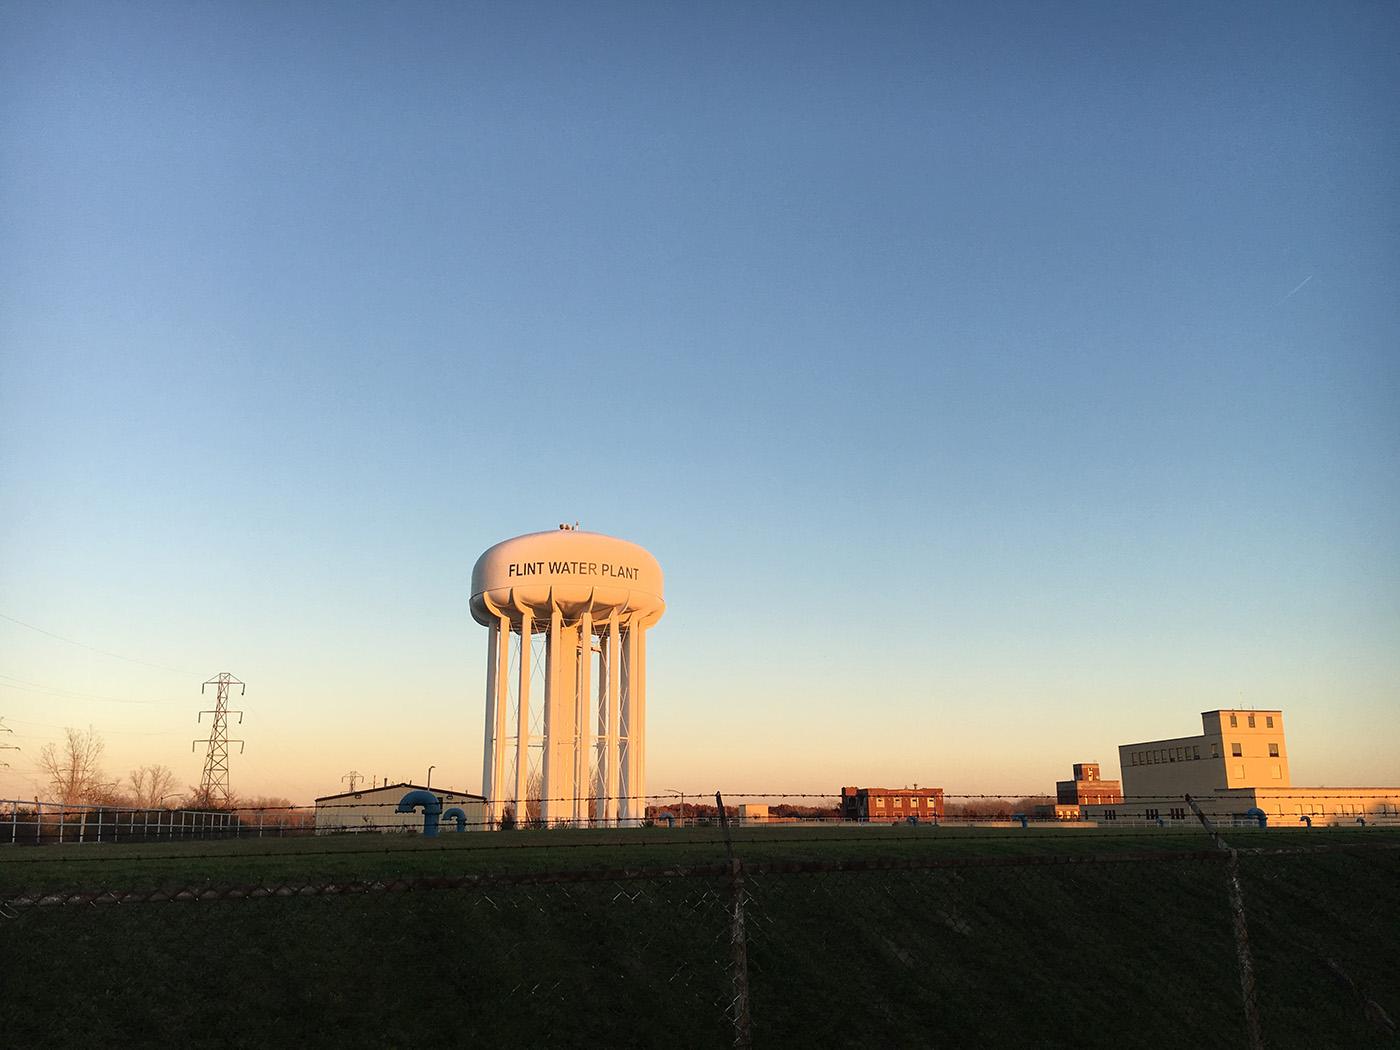 The water treatment plant in Flint, Michigan. Photo: Caitlin Saks/WGBH